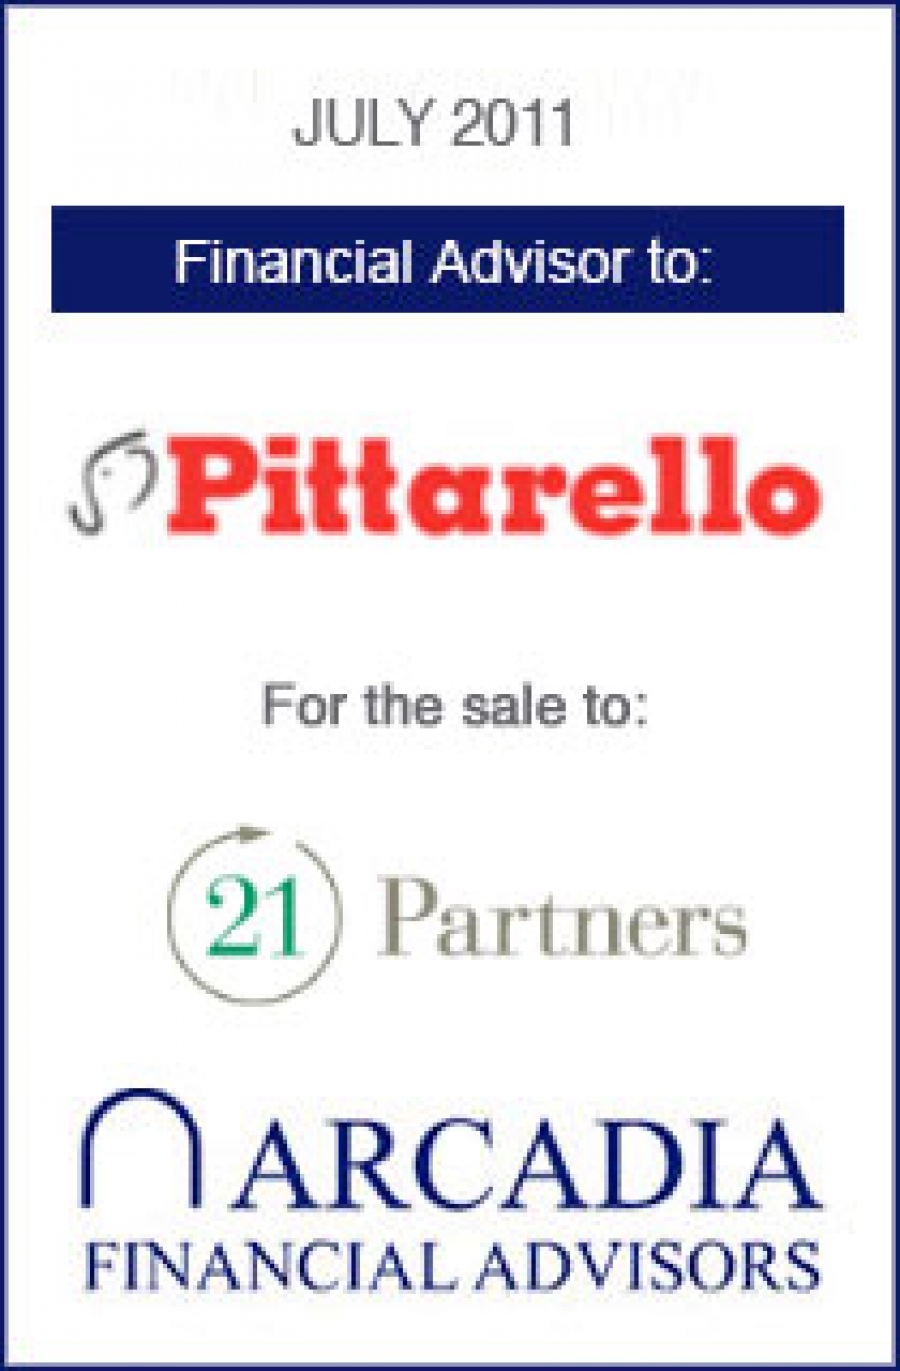 Transaction completed with Pittarello